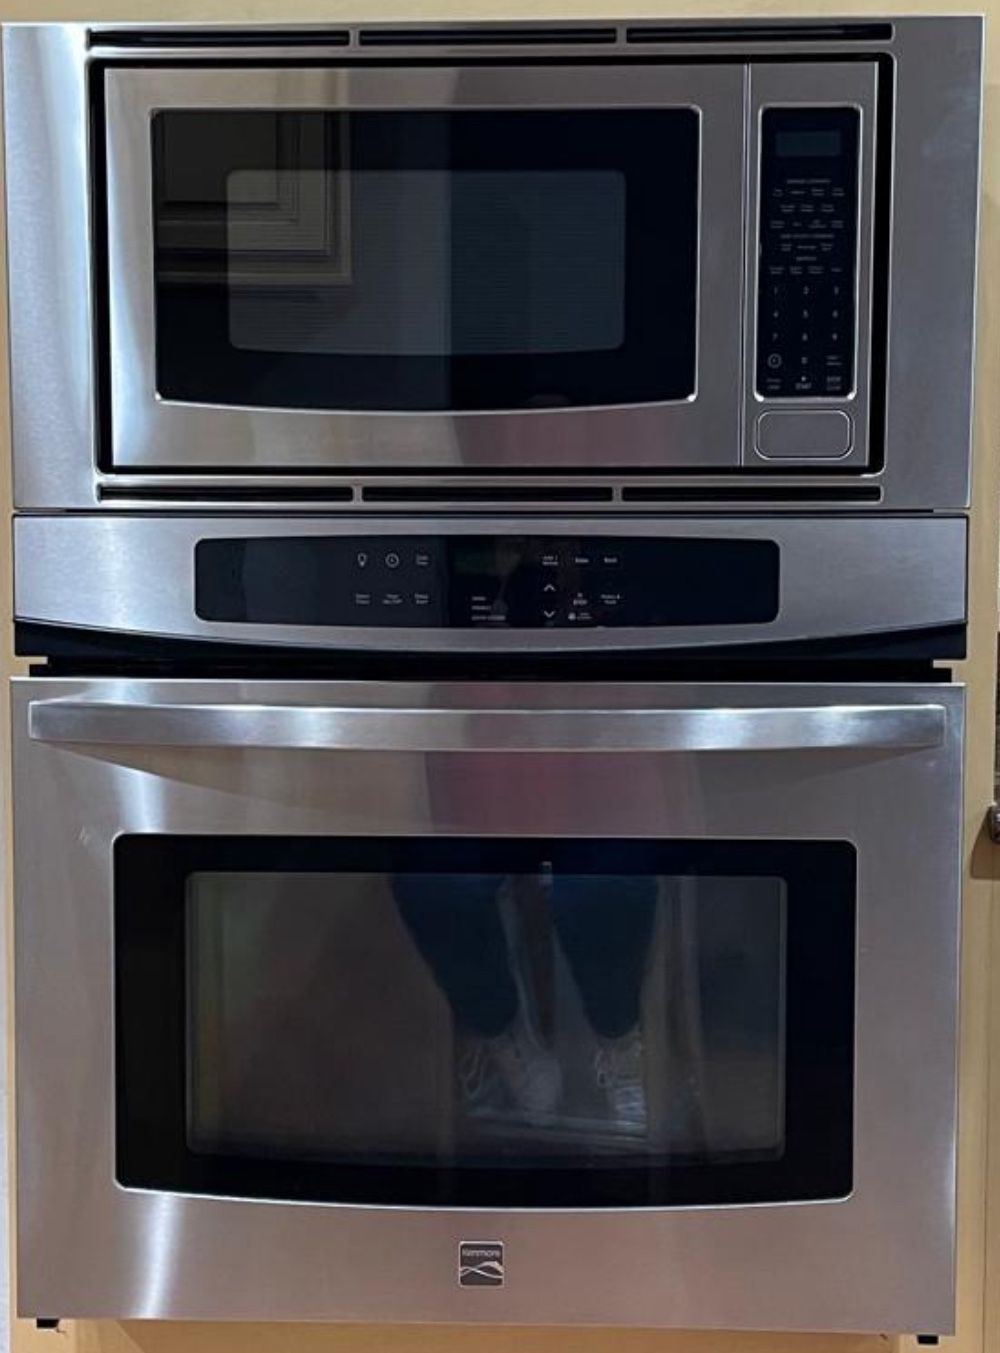 Kenmore 49613 30" Electric Combination Wall Oven - Stainless Steel